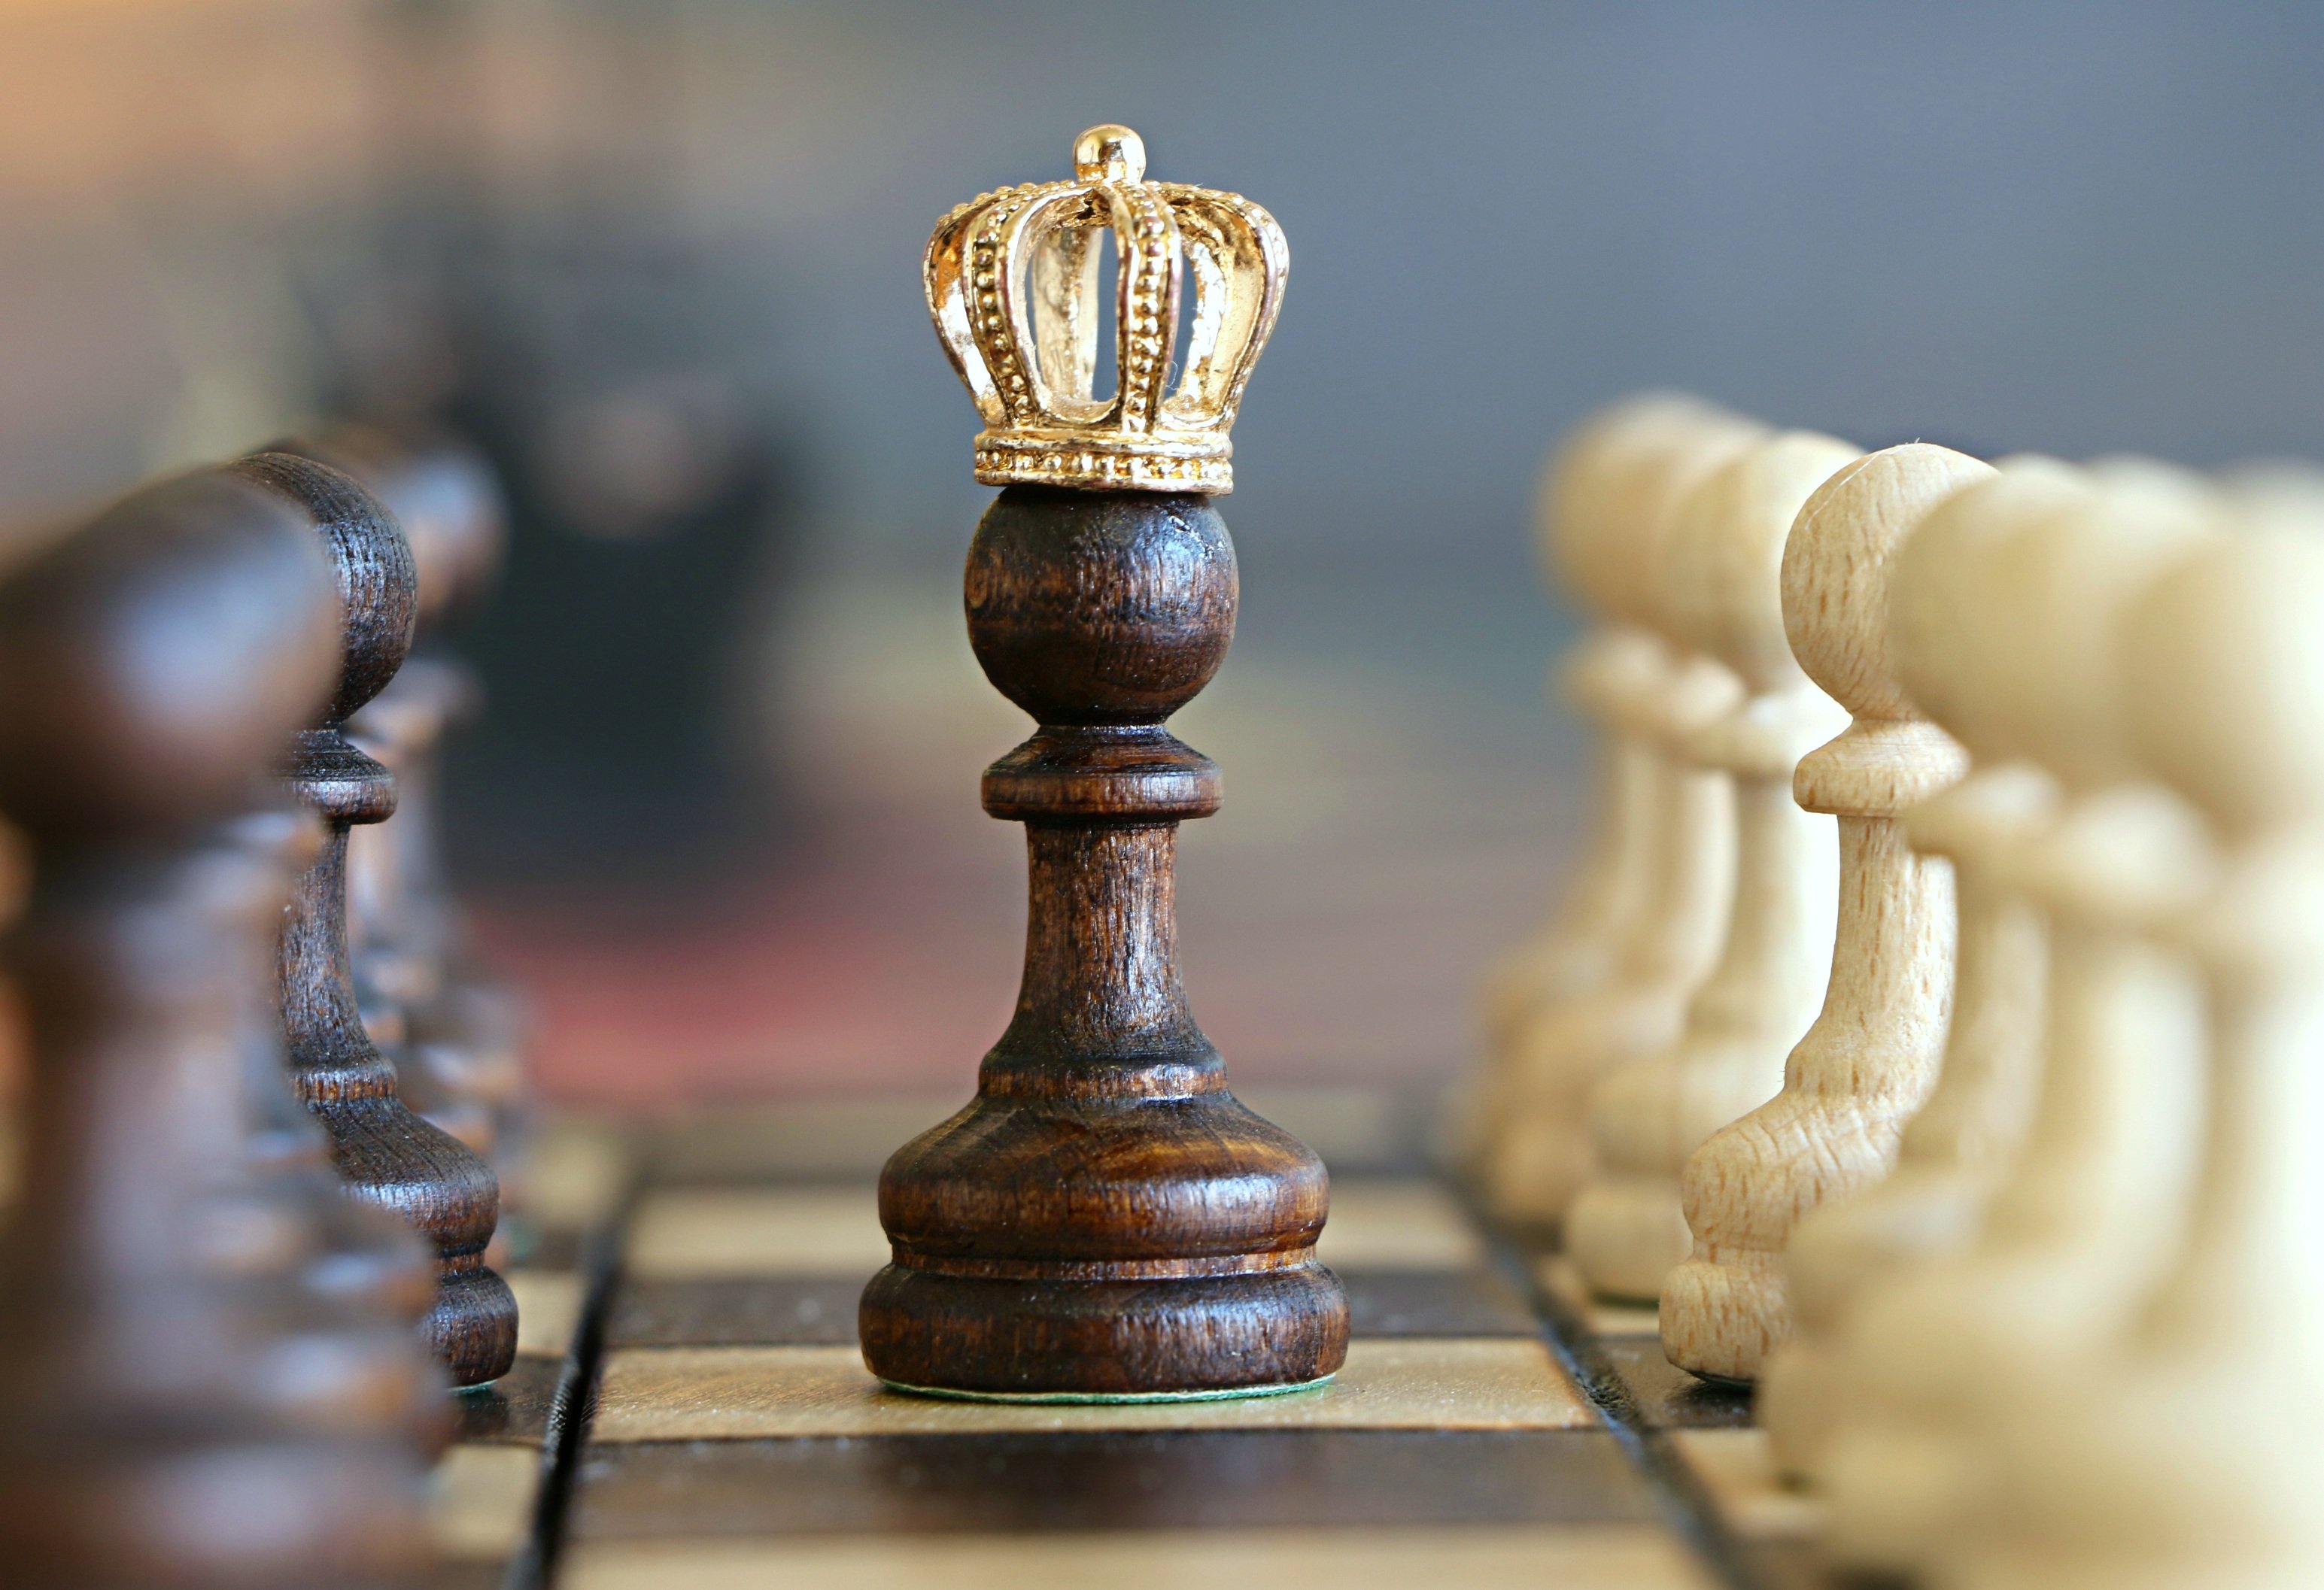 Content marketing is king